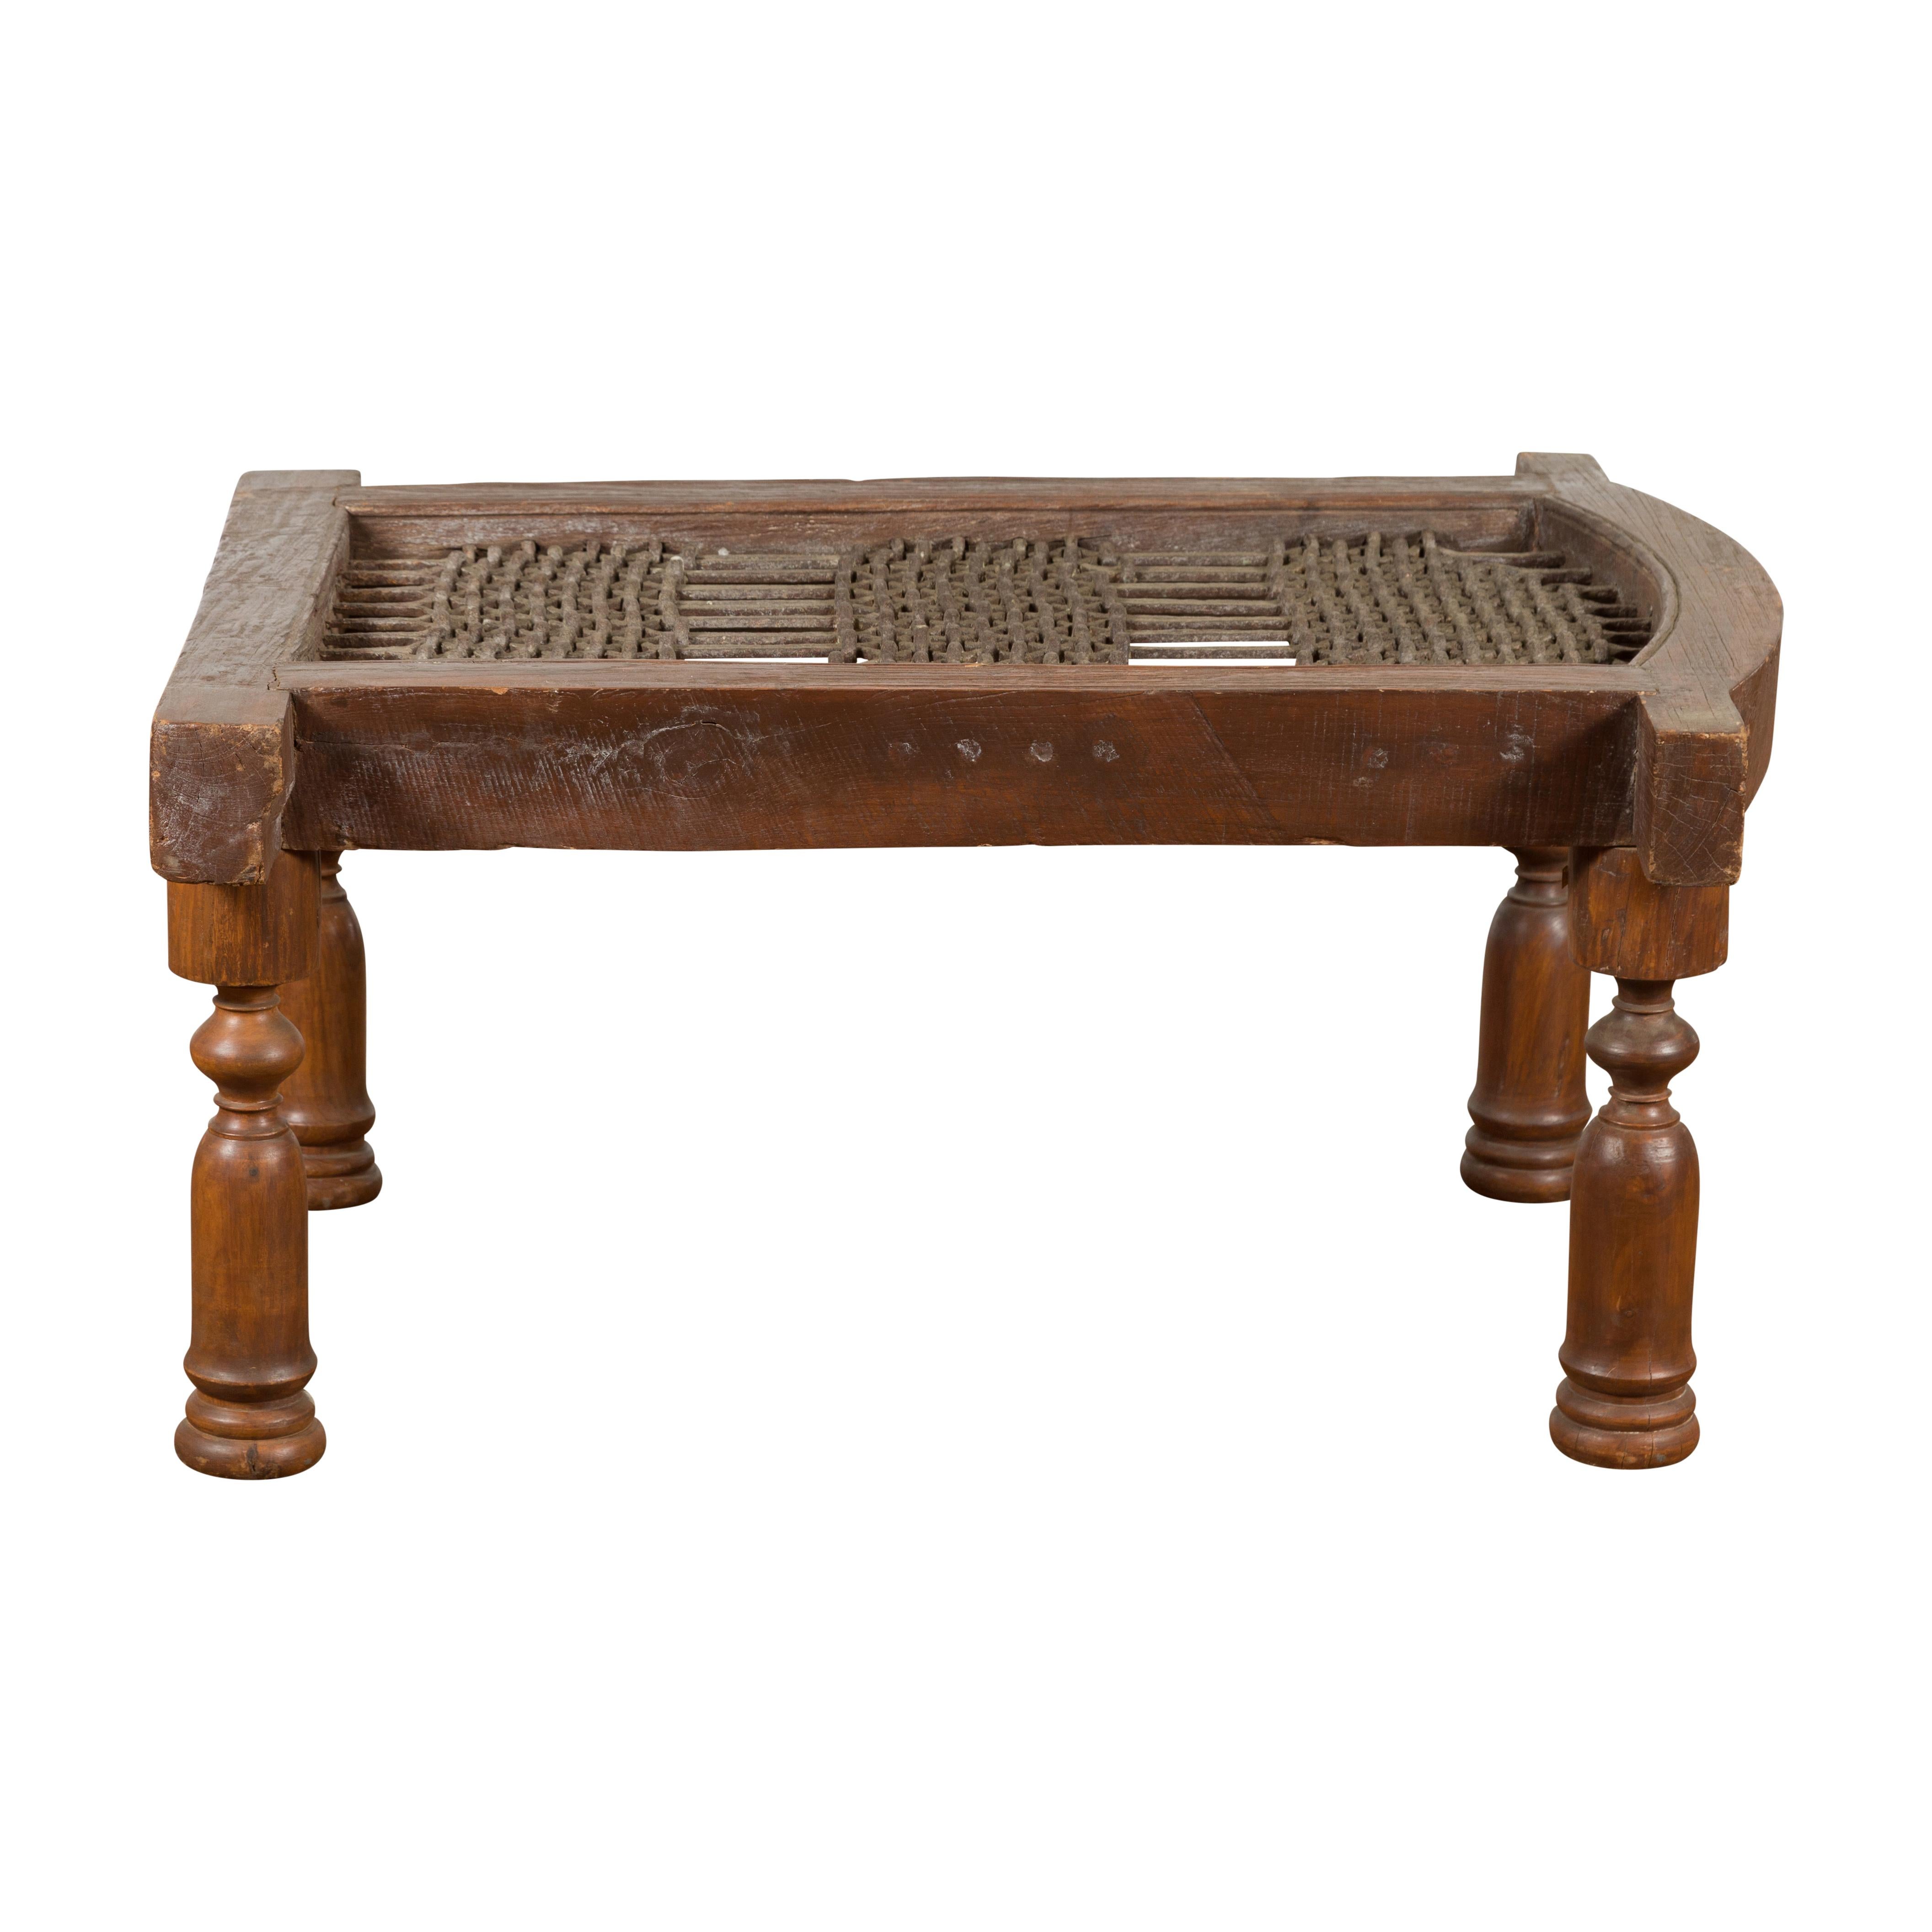 Rustic 19th Century Indian Iron Window Grate Made Into a Coffee Table For Sale 9